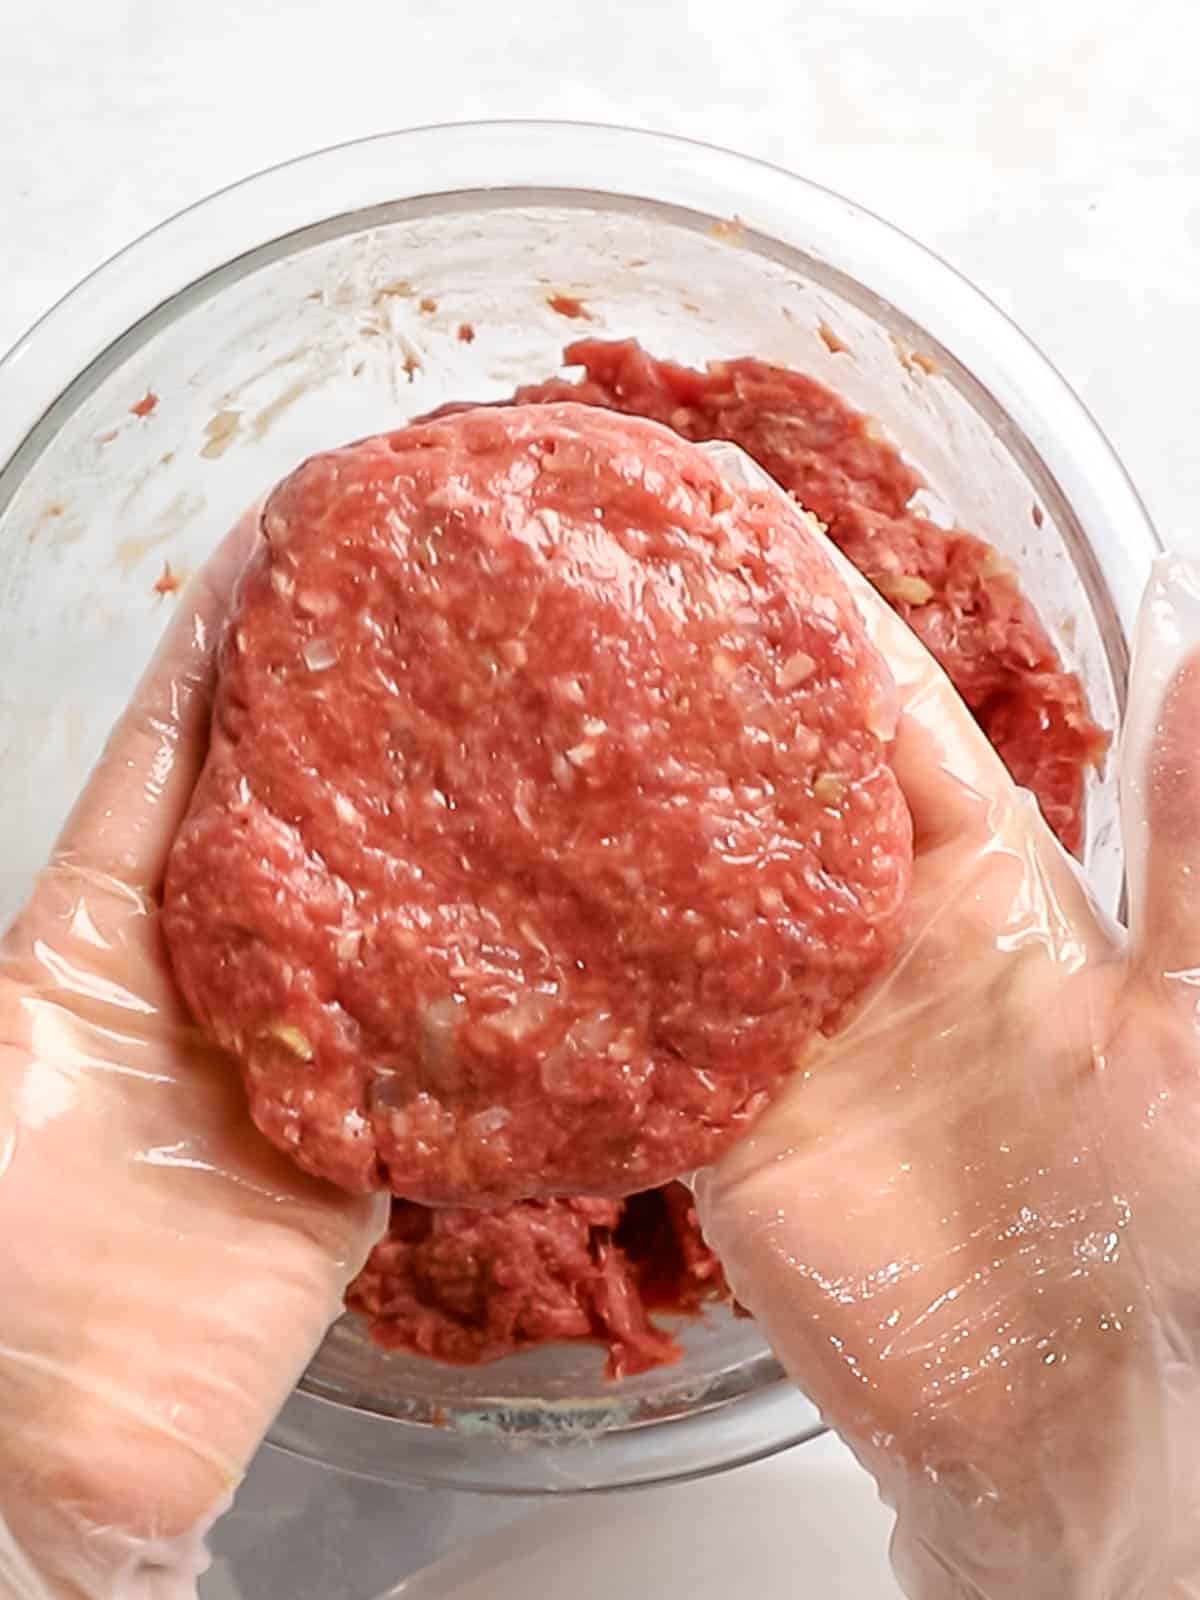 Ground beef formed into a burger patty that is held with gloved hands.